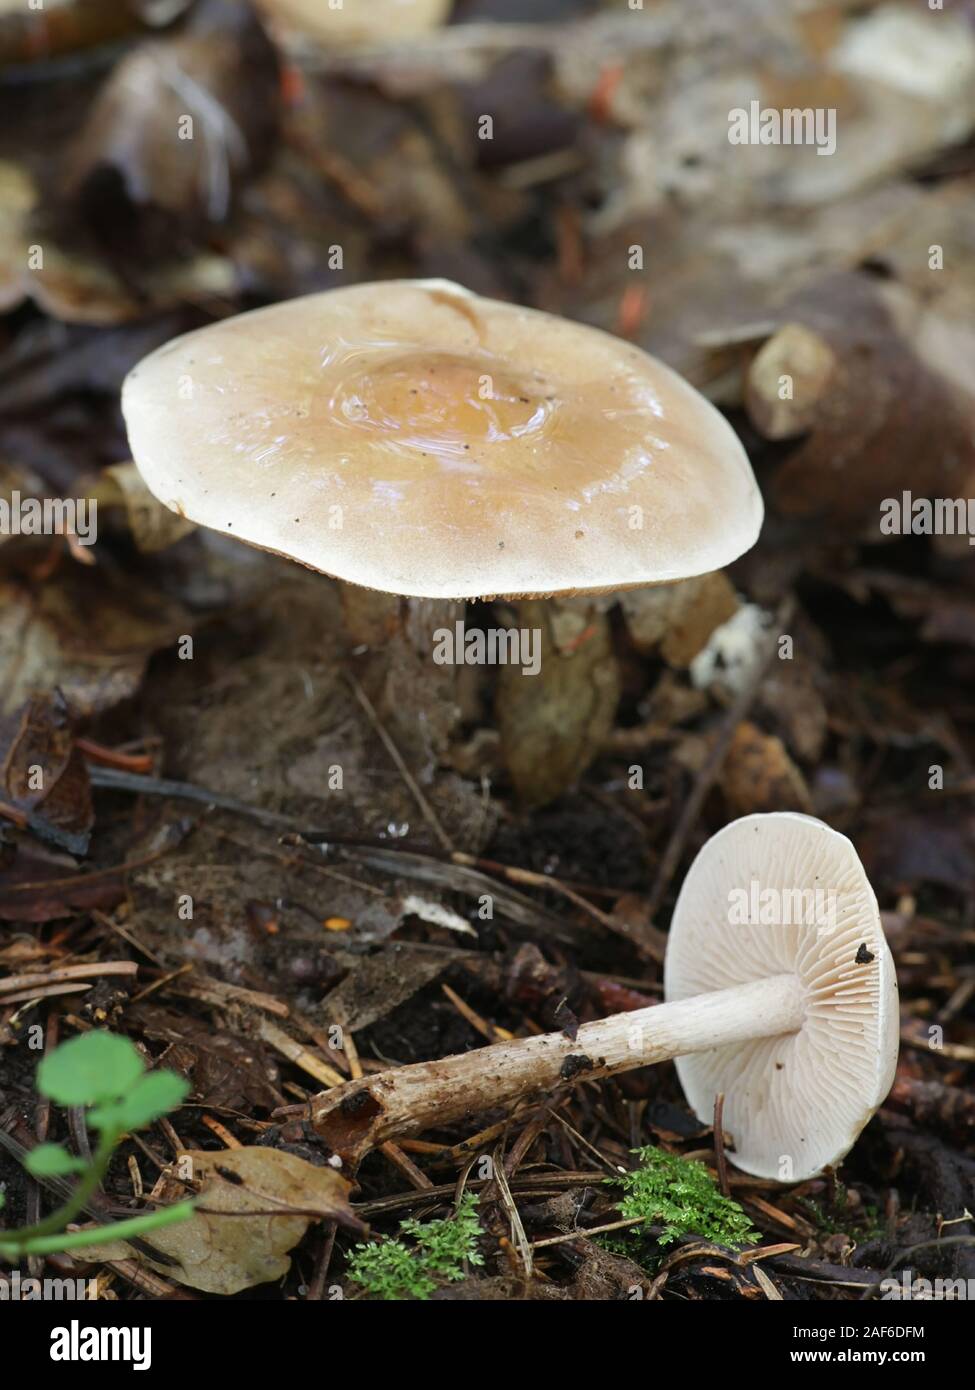 Hebeloma crustuliniforme, known as poison pie or poisonpie, wild poisonous mushroom from Finland Stock Photo